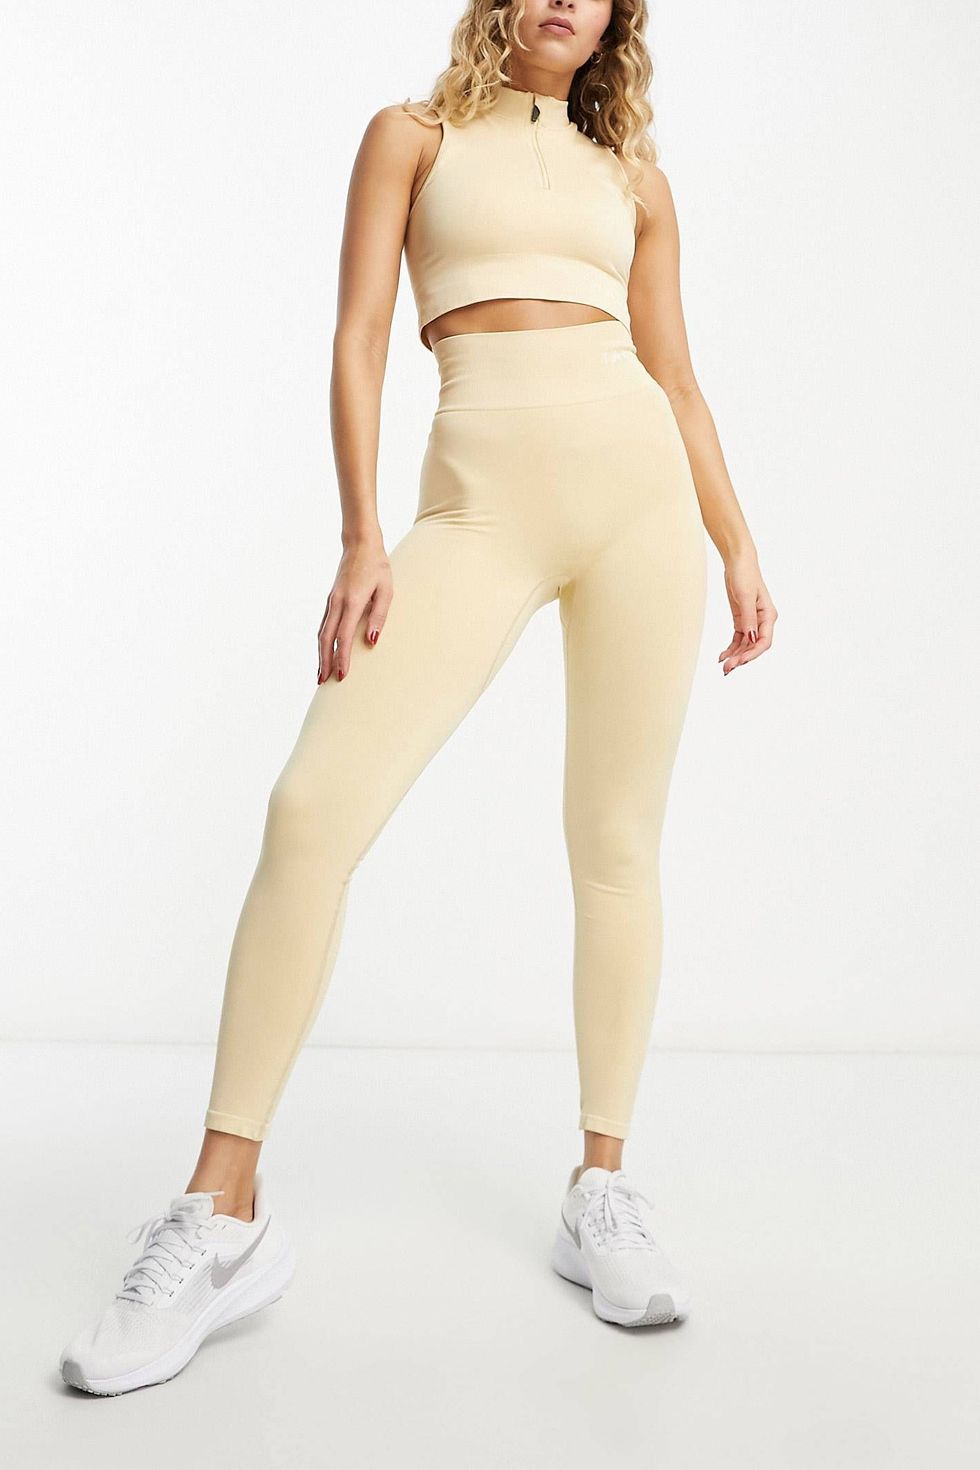 Seamless style for your workout routine. Ivory vibes and shaping